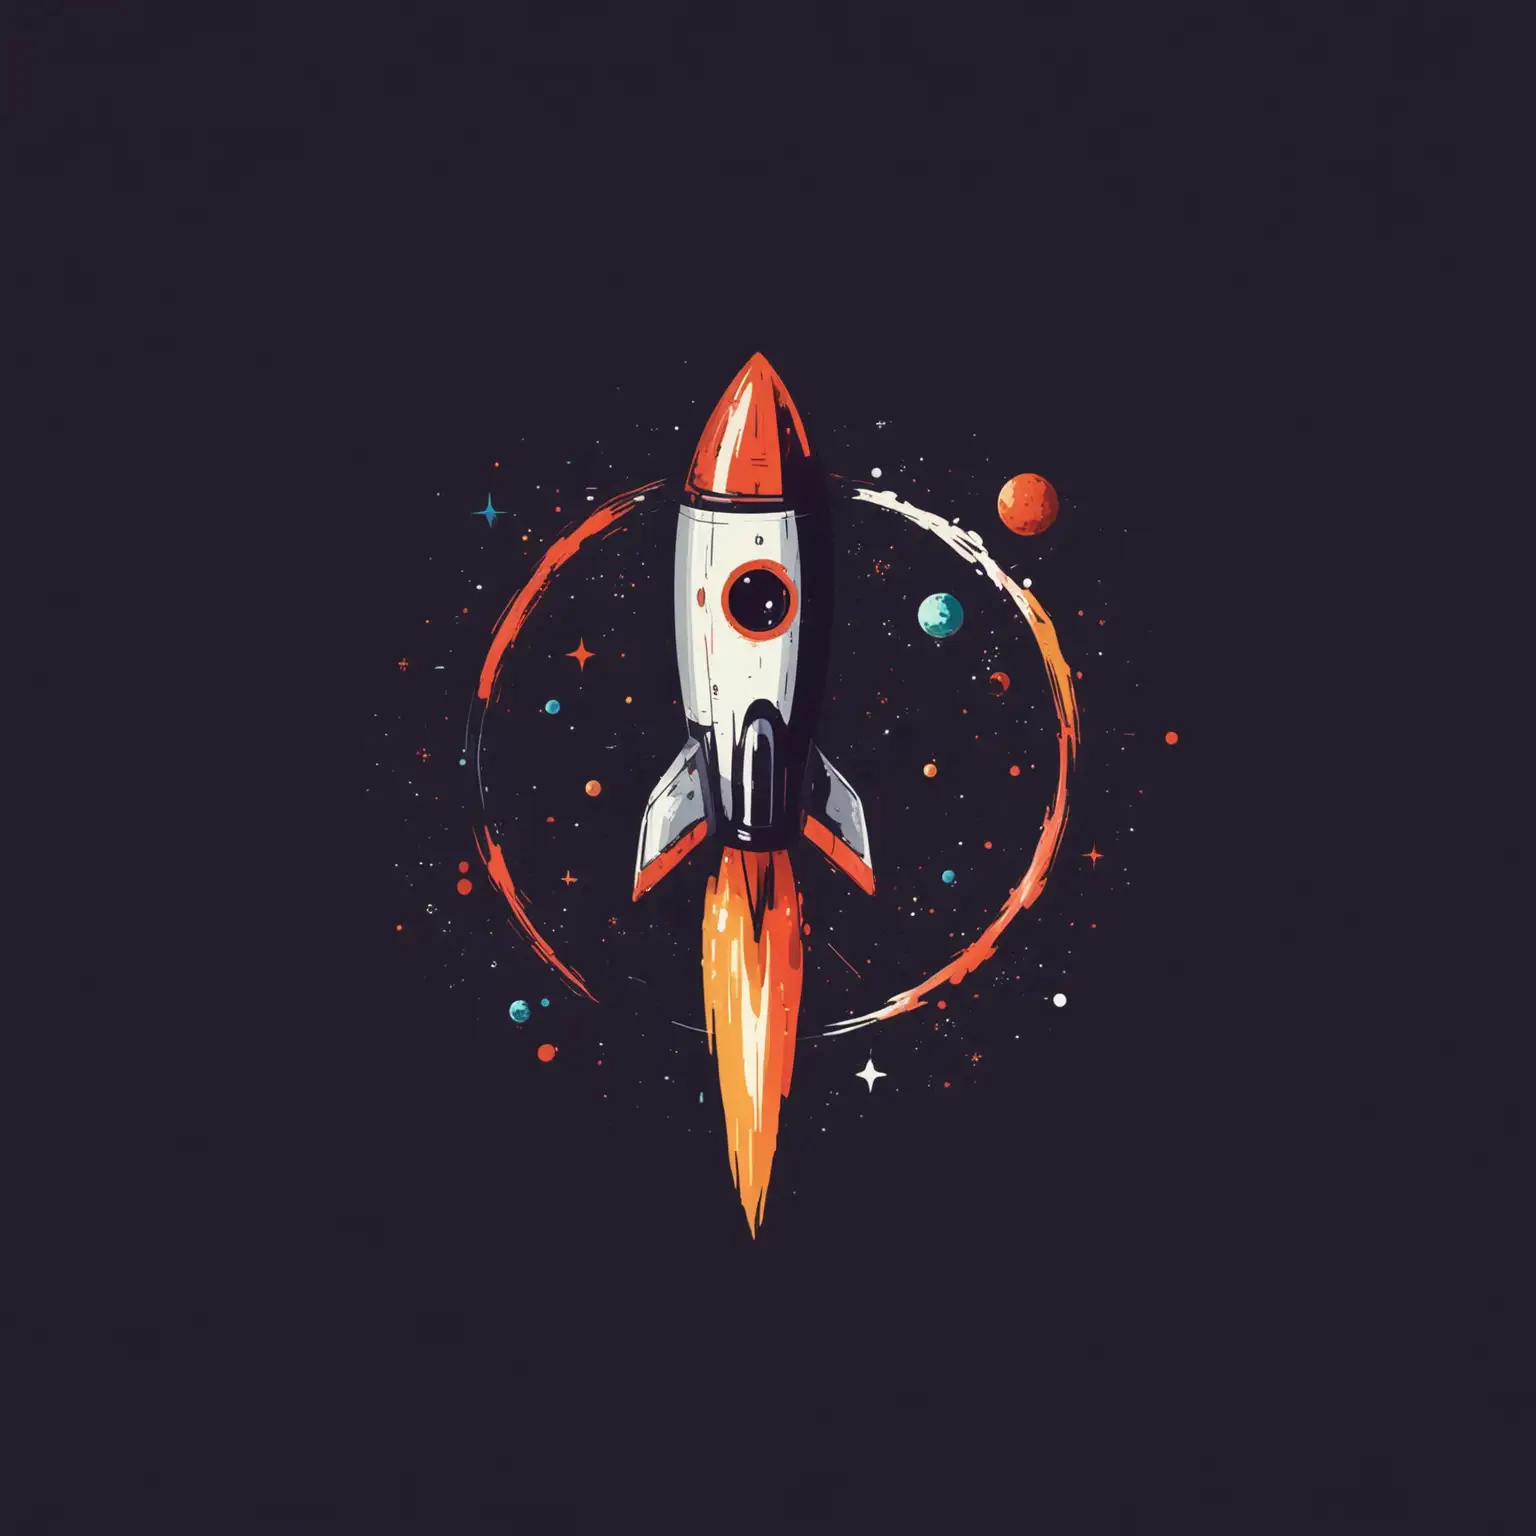 Minimalist-Rocket-in-Abstract-Universe-Space-Art